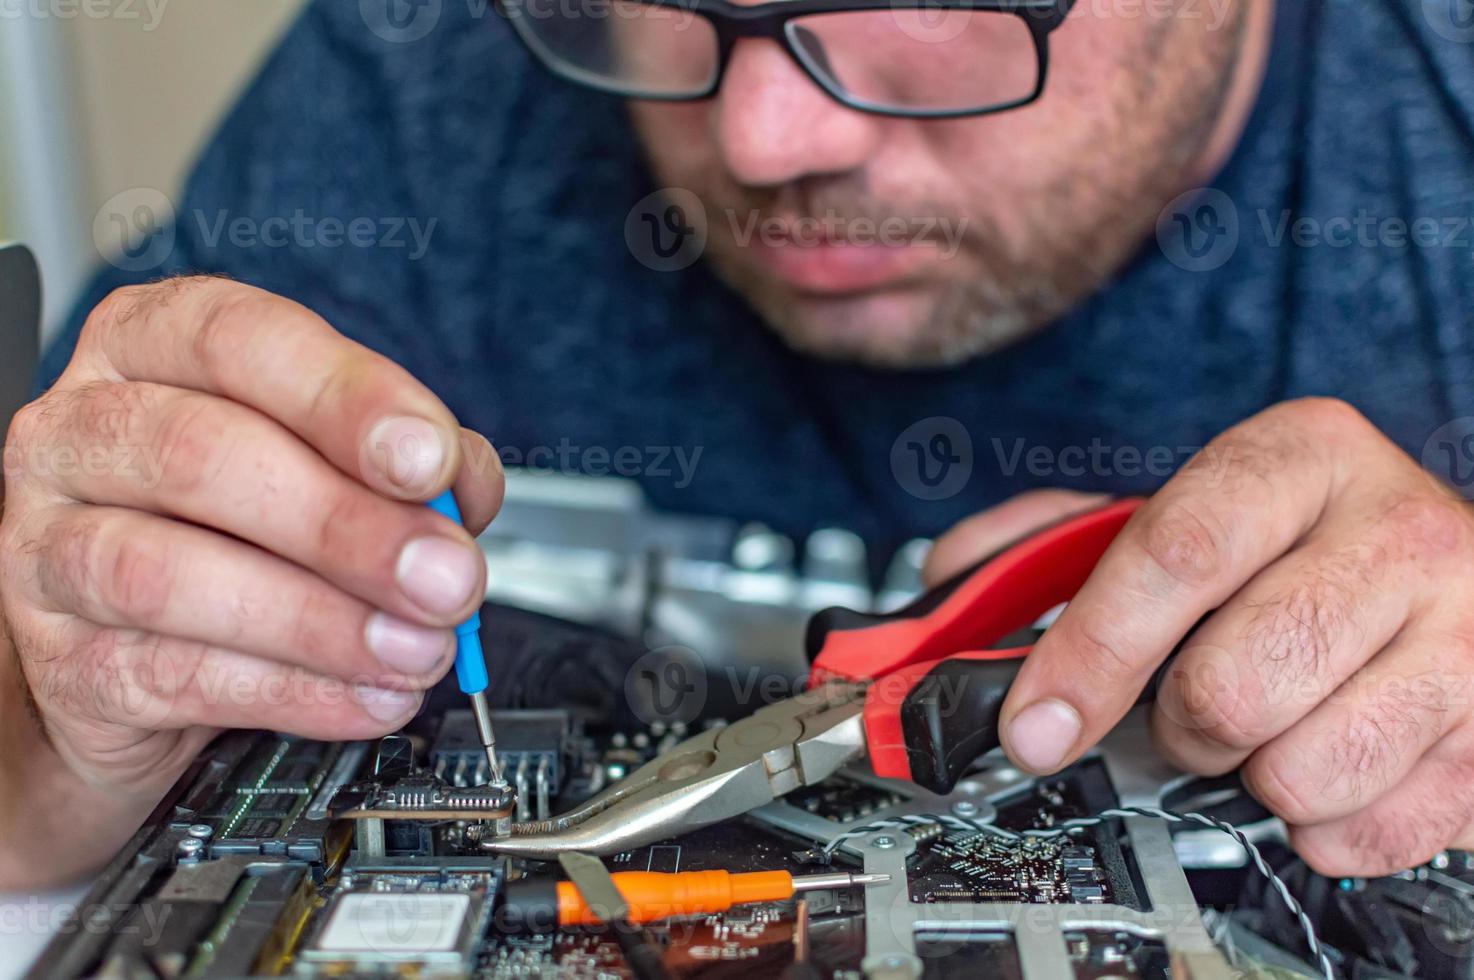 a man repairs a computer, solders a board, repairs electronics and modern technologies photo